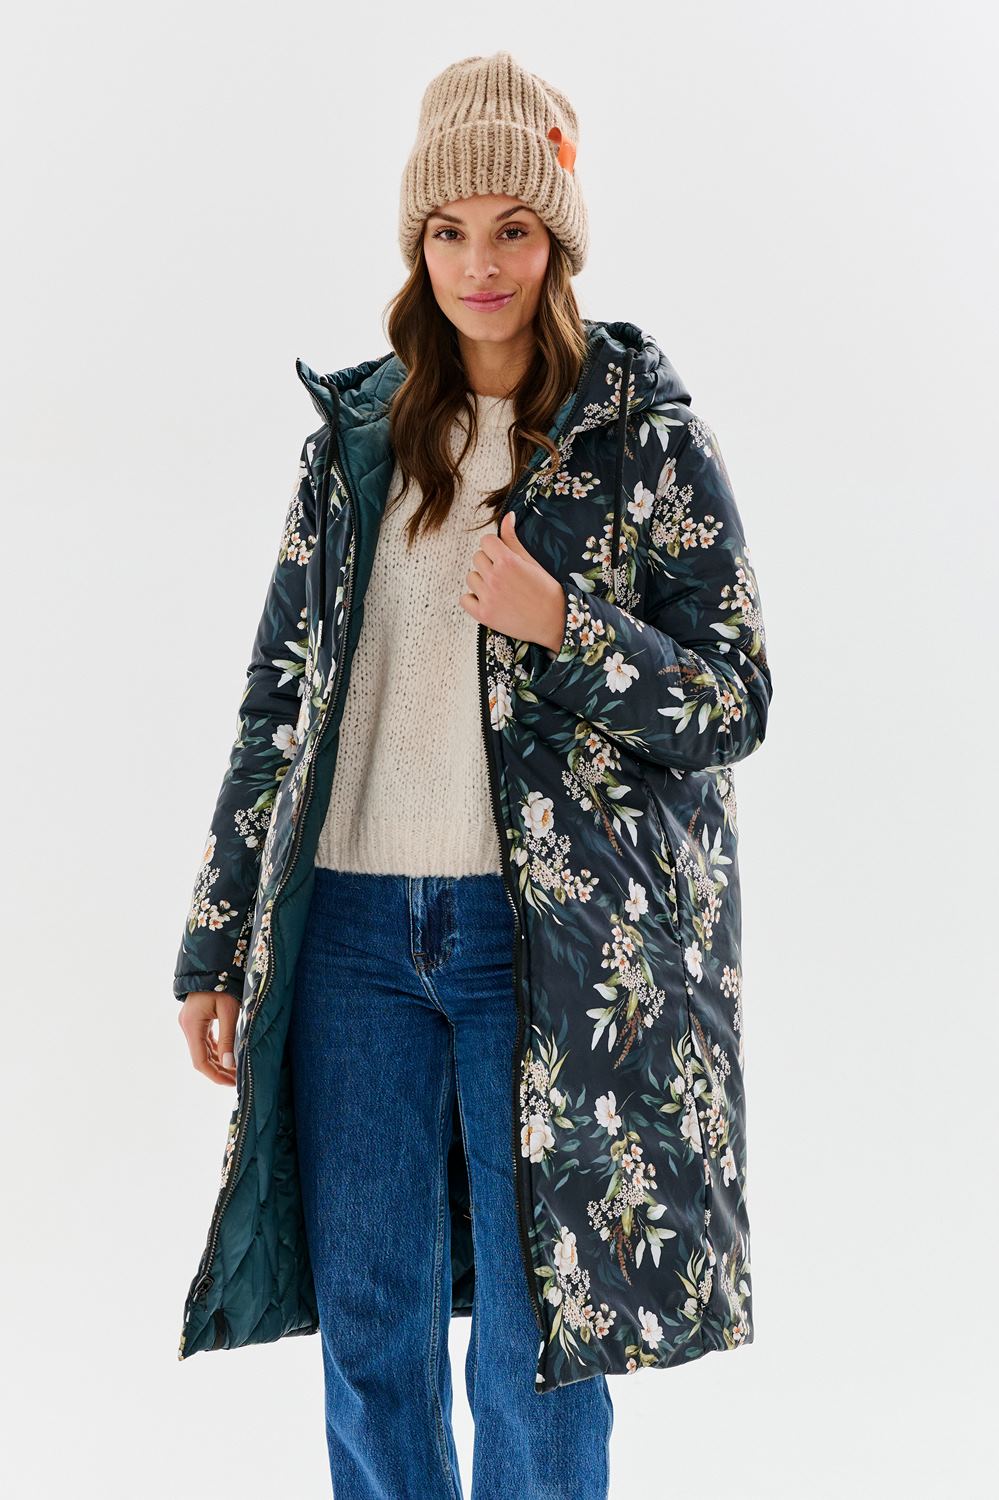 Silver Mist double-sided quilted coat